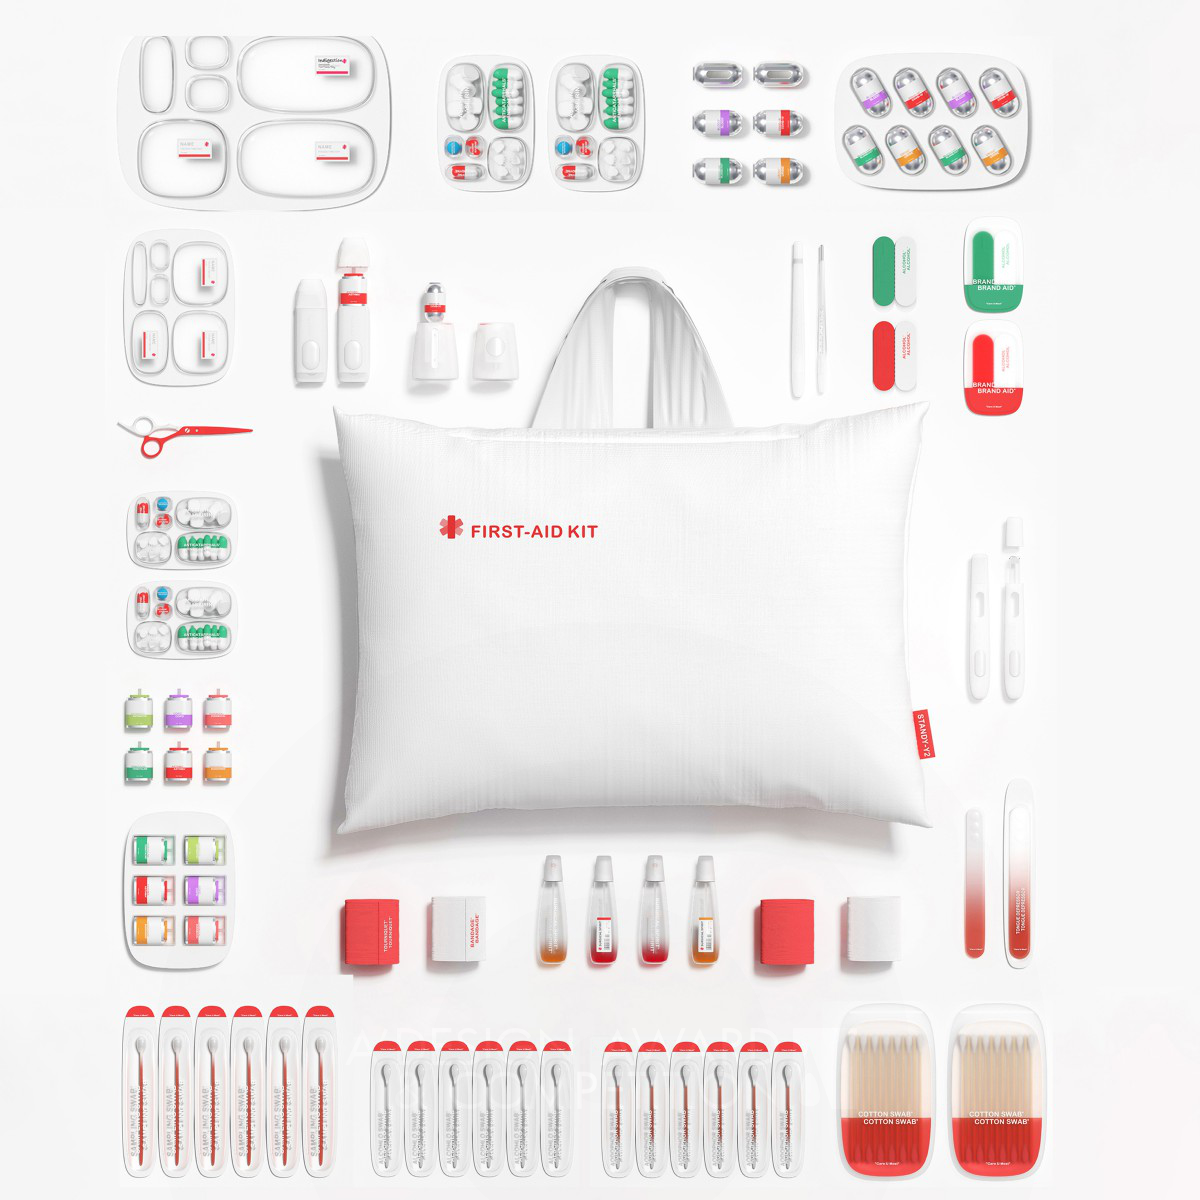 Care U Most Home First Aid Kit by Yangyang Liao